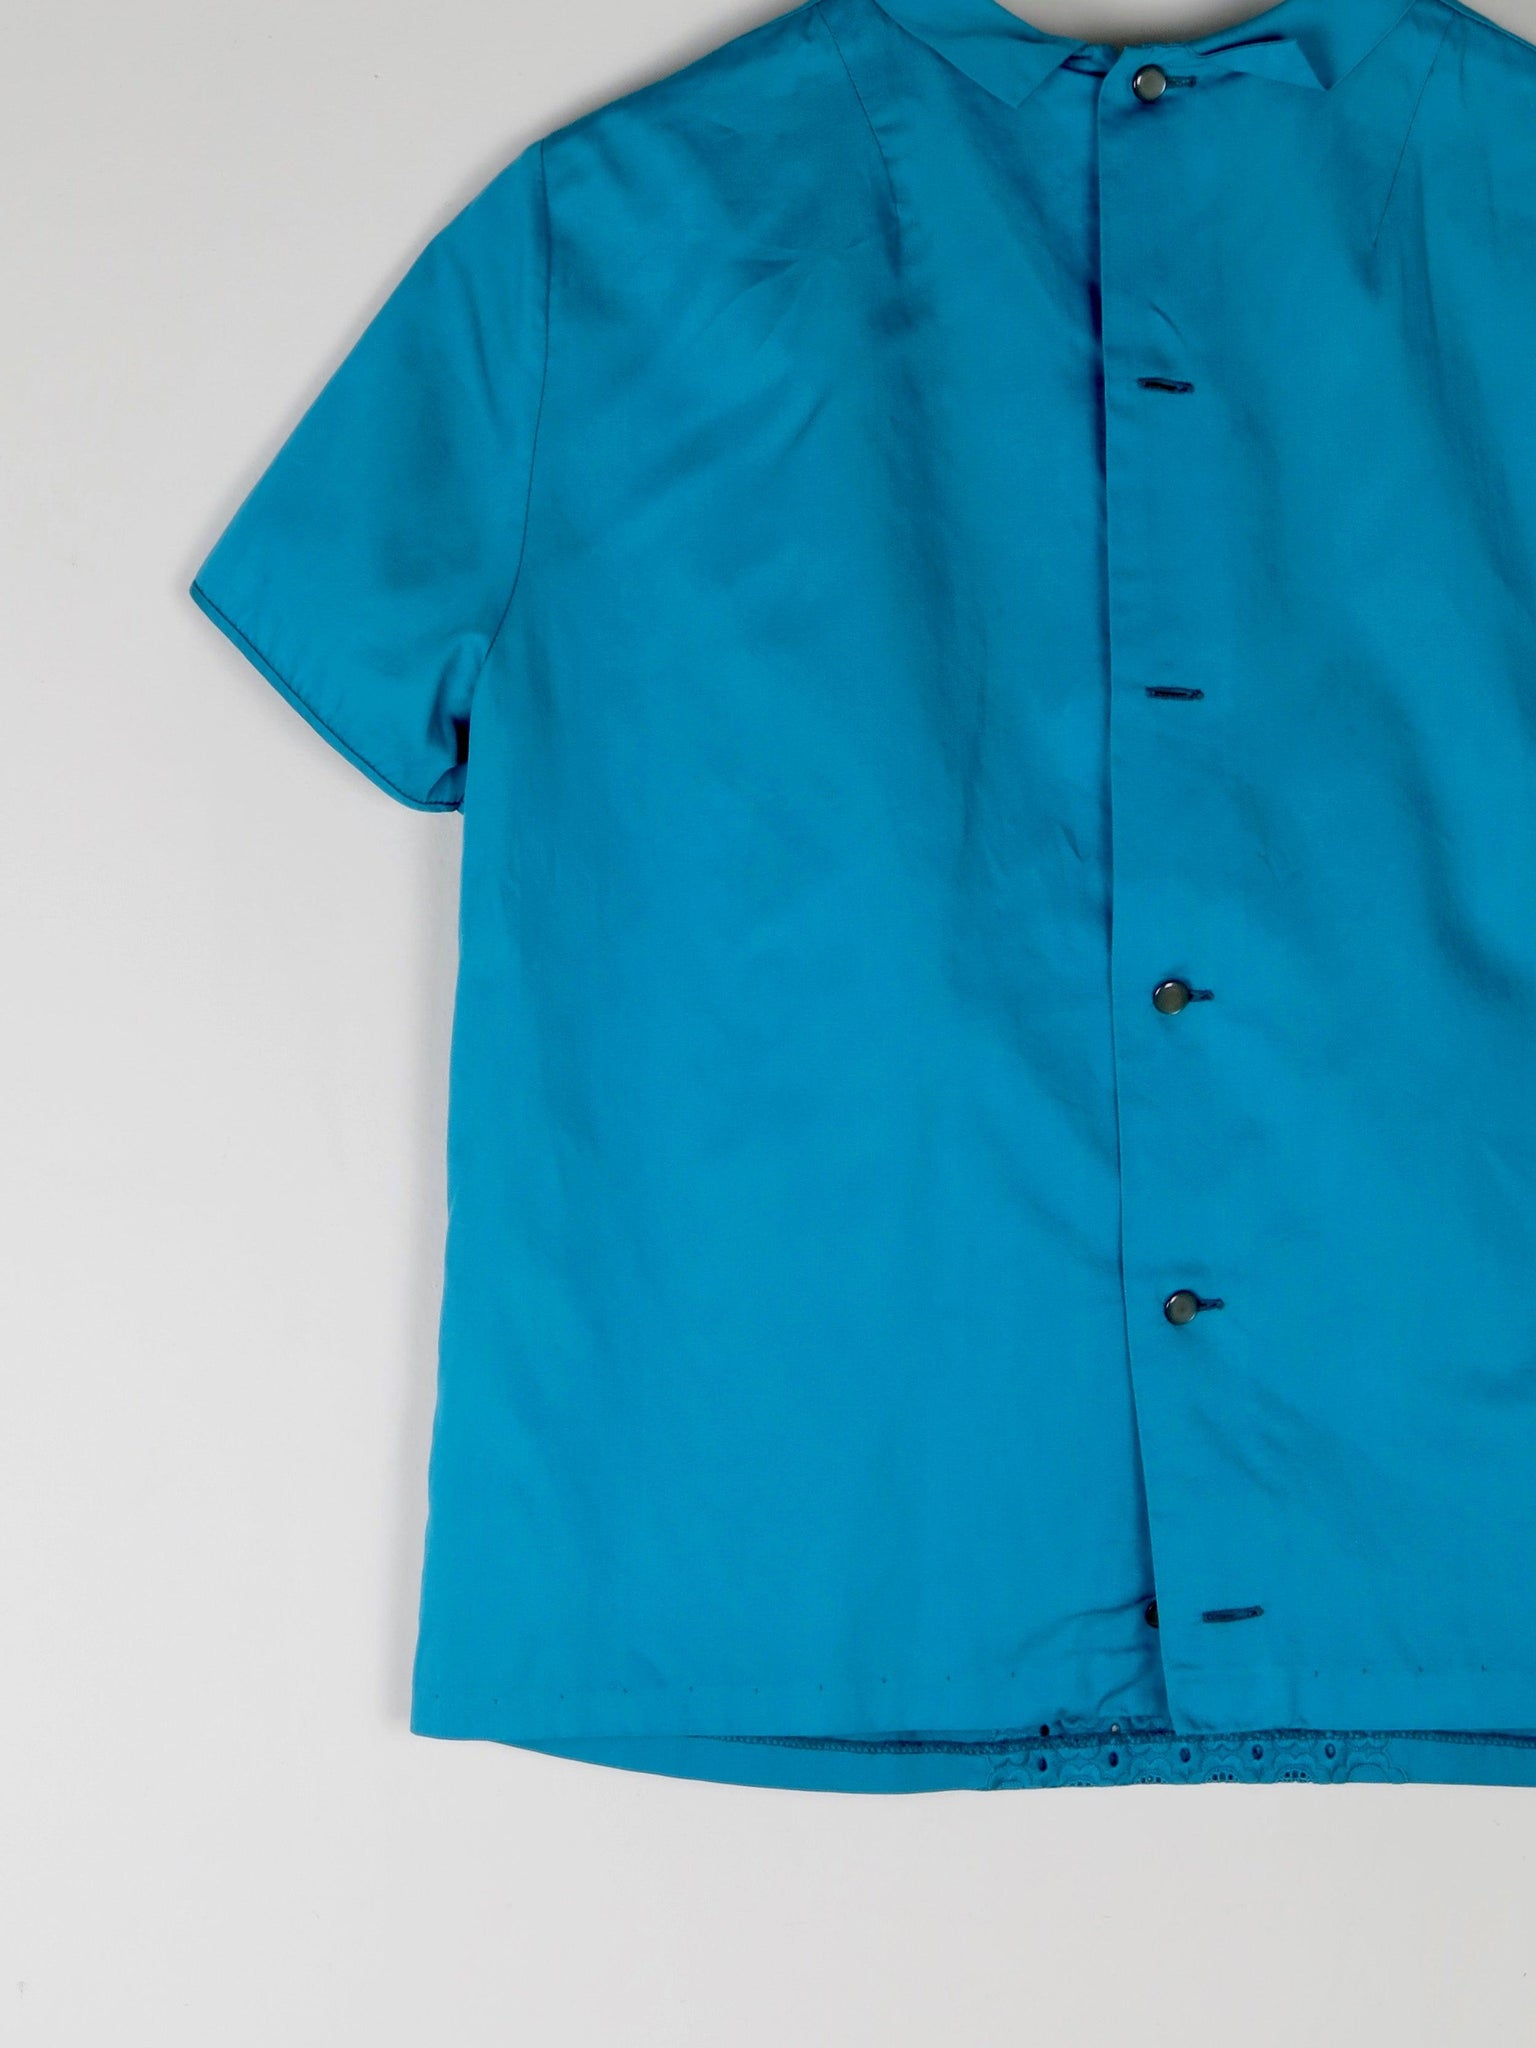 Petrol Blue 1950s Blouse S/M - The Harlequin